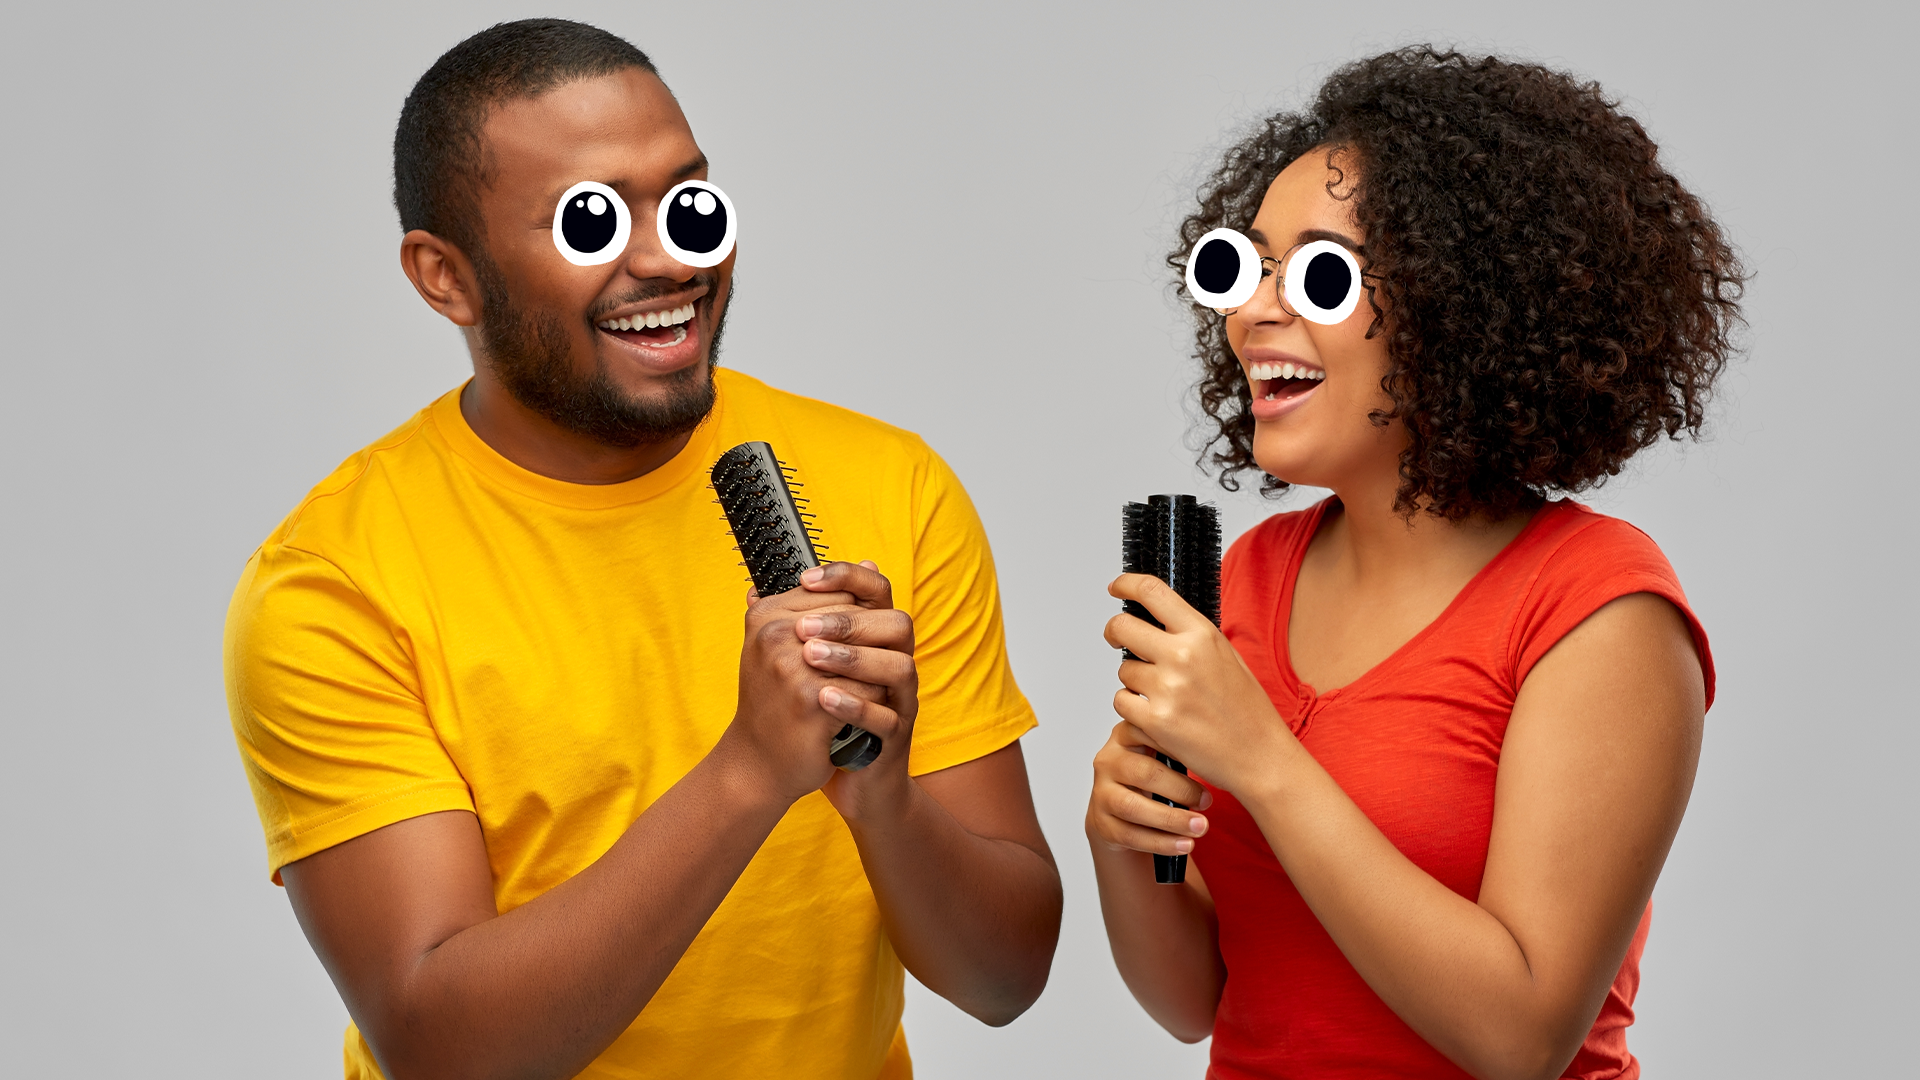 Man and woman singing into hairbrushes